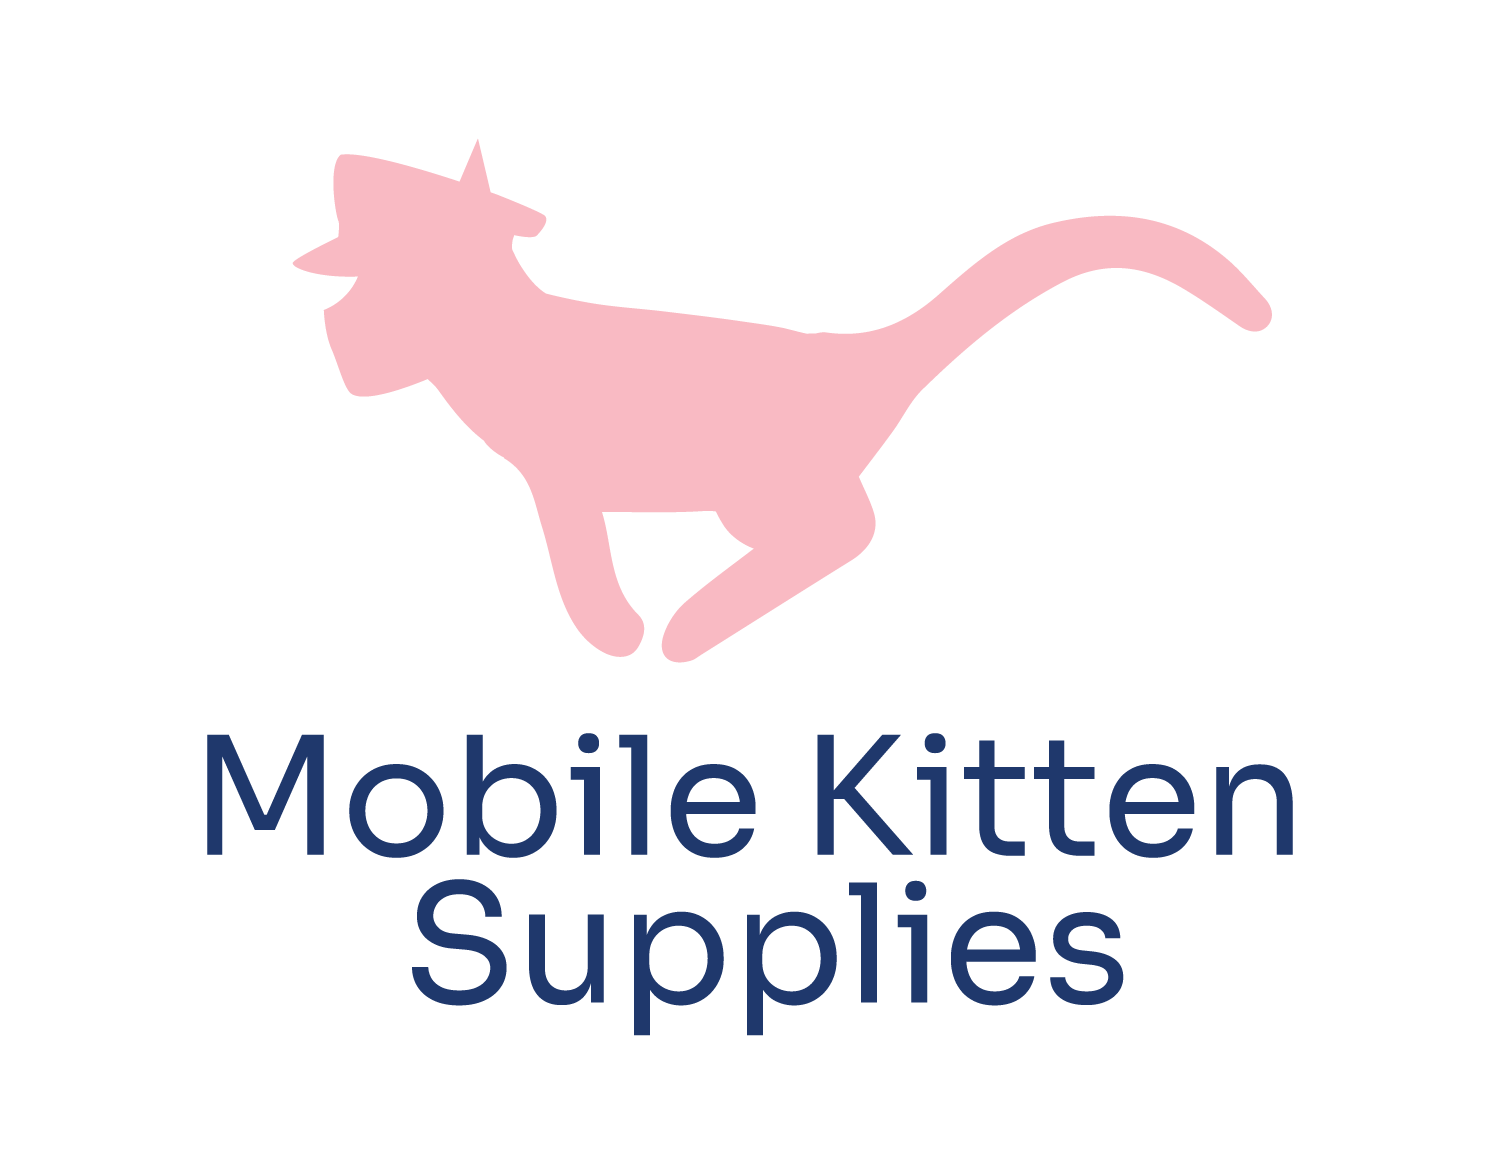  This image shows the sillouette of a pink cat running
				to the left with a mailman's hat. Below the pink cat is navy, sans
				serif text which says Mobile Kitten Supplies